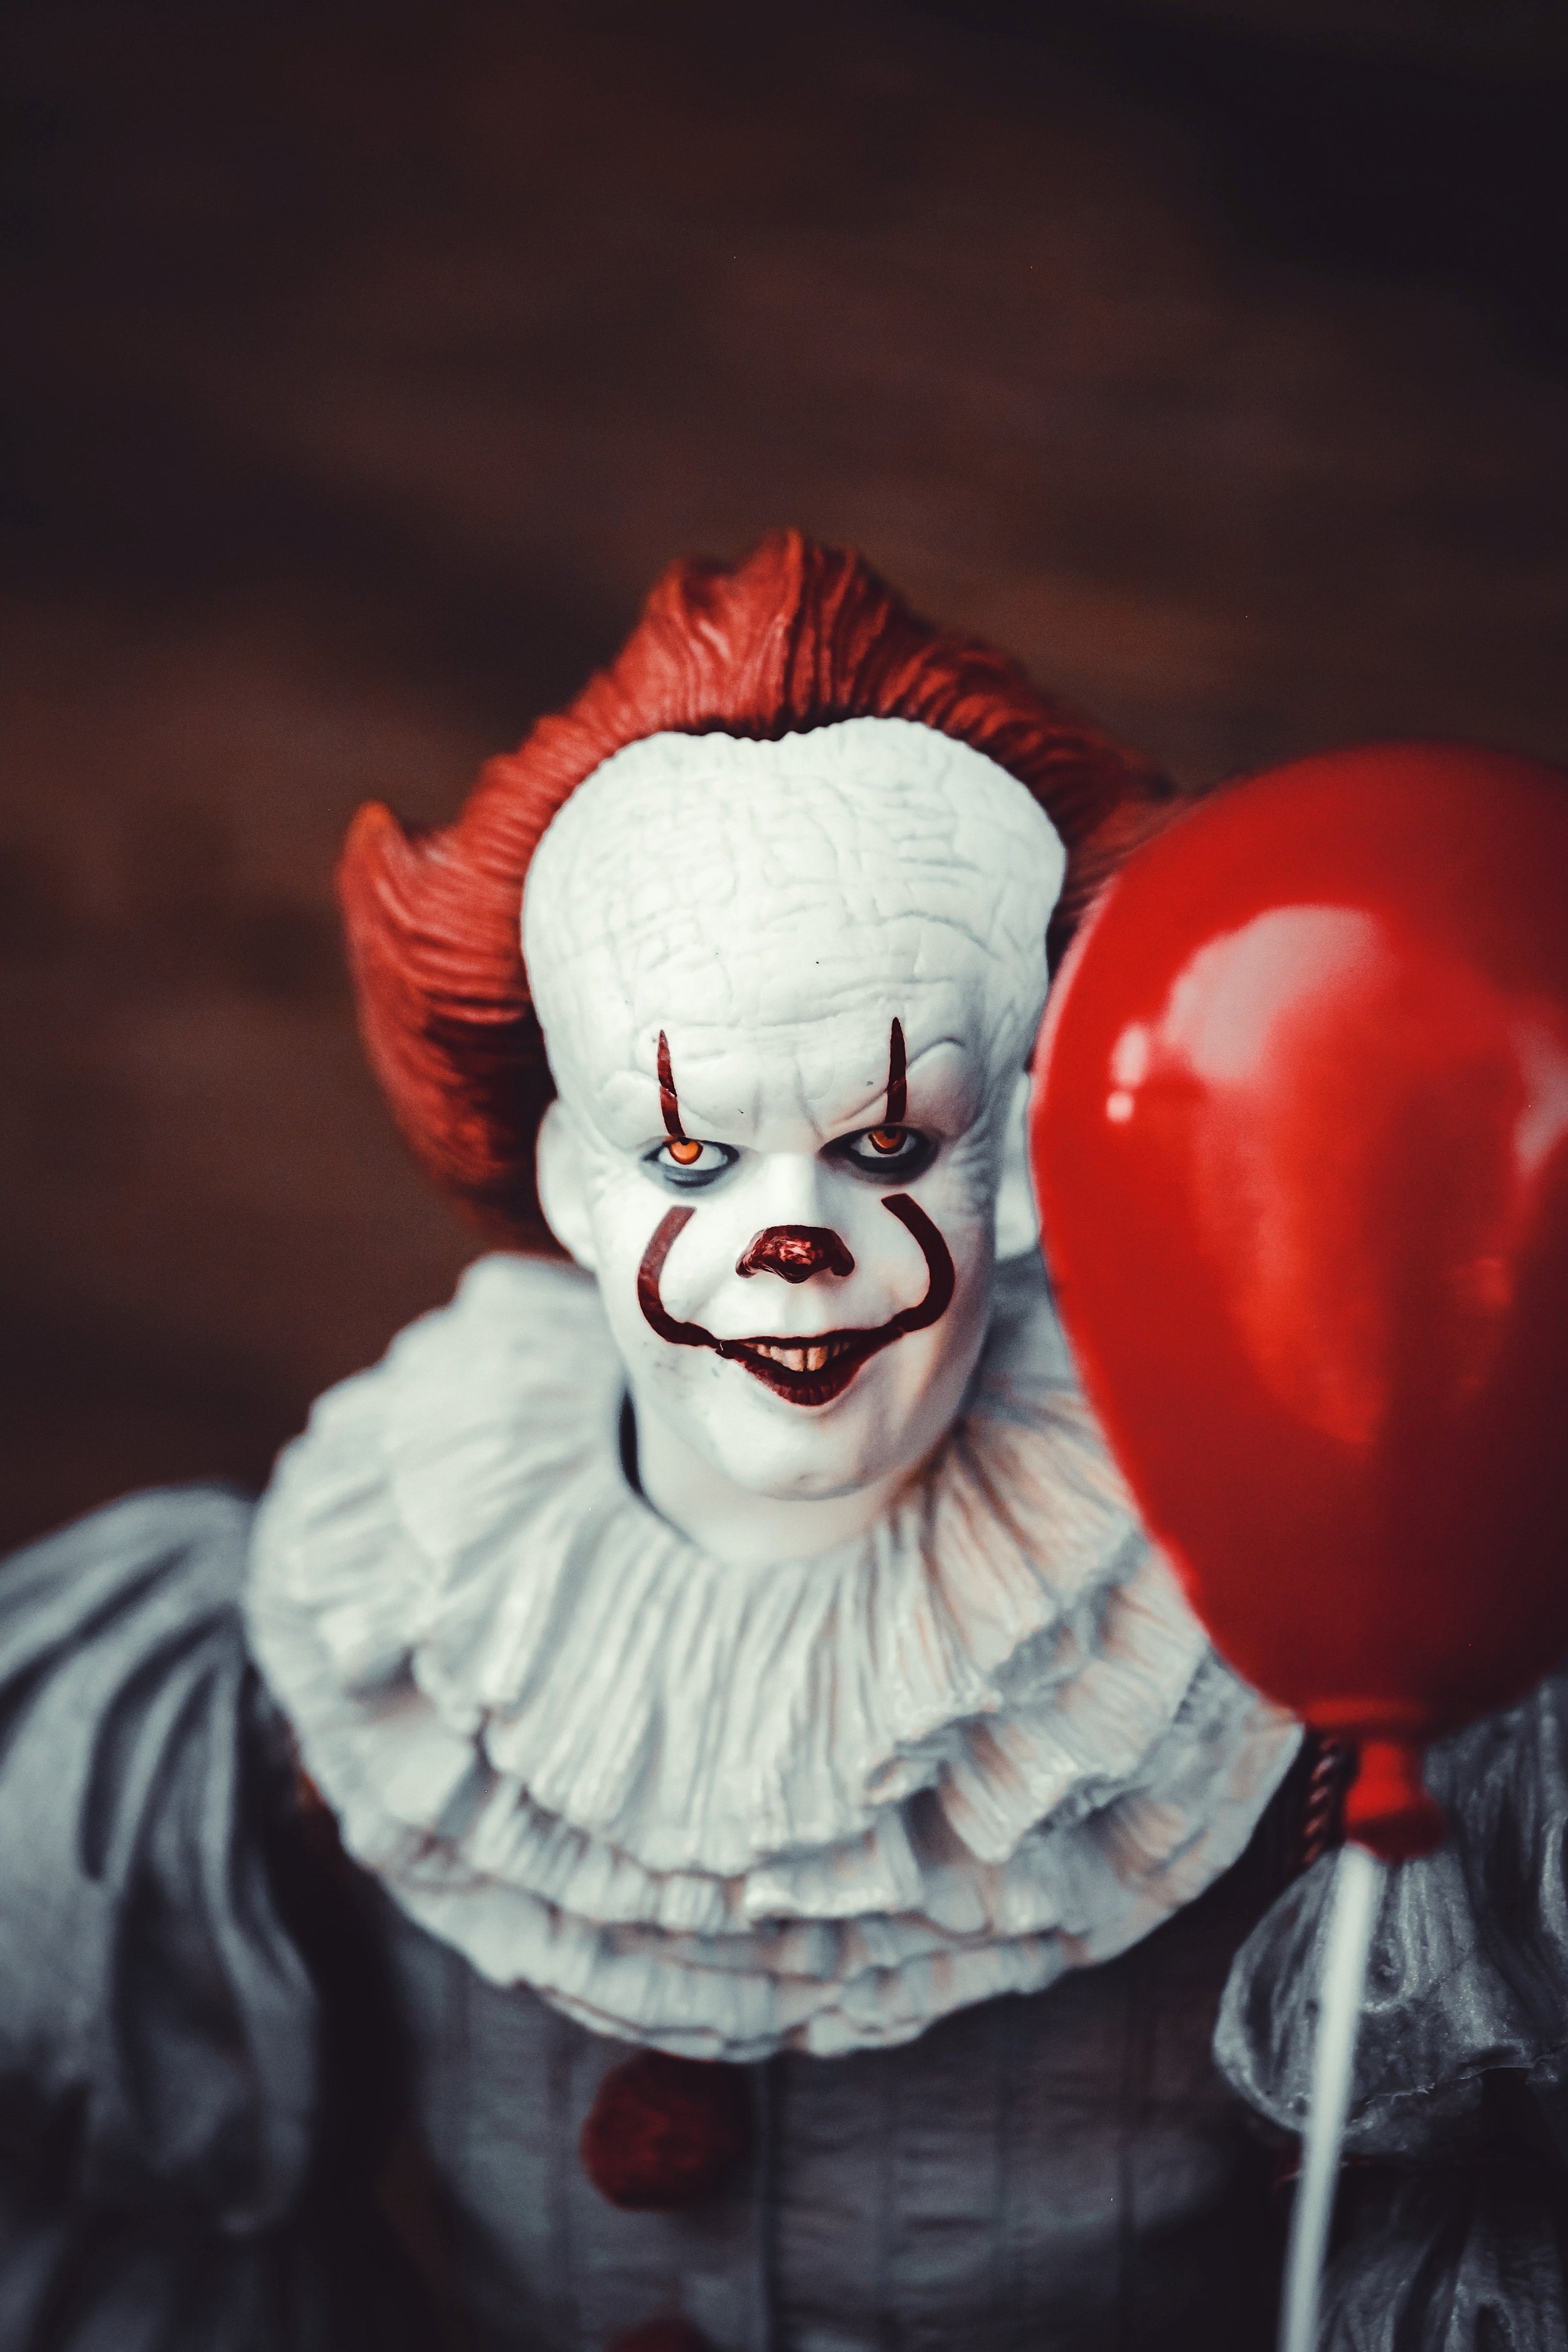 Pennywise of It fame